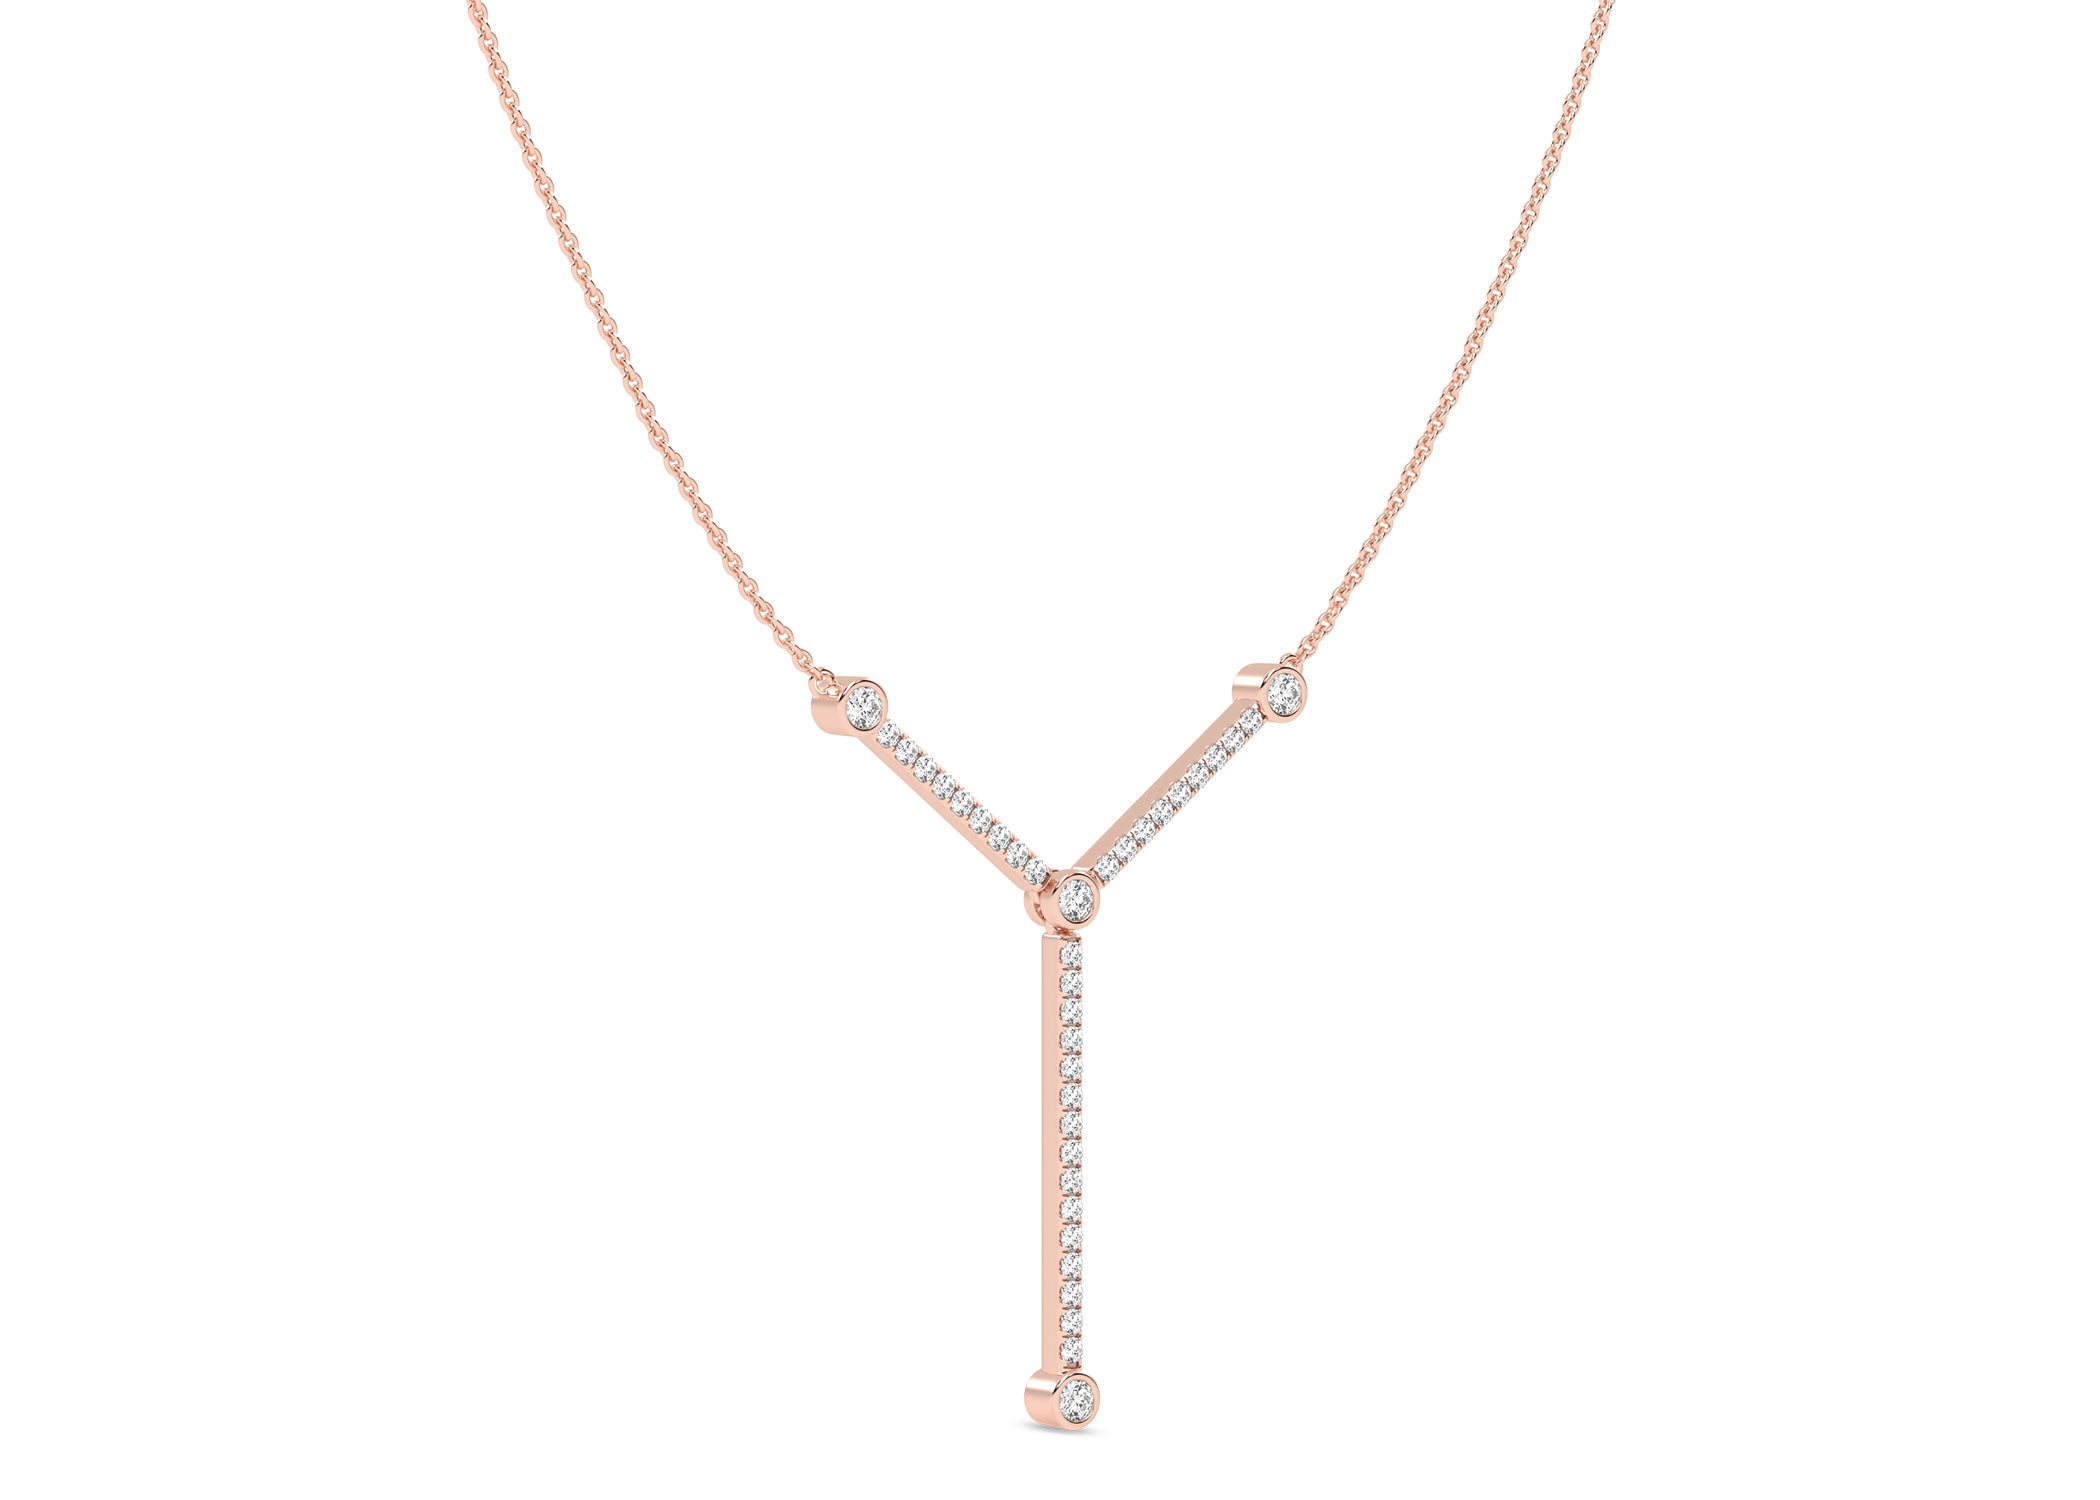 Encompassing Round Stationed Embellished Y Necklace Replica